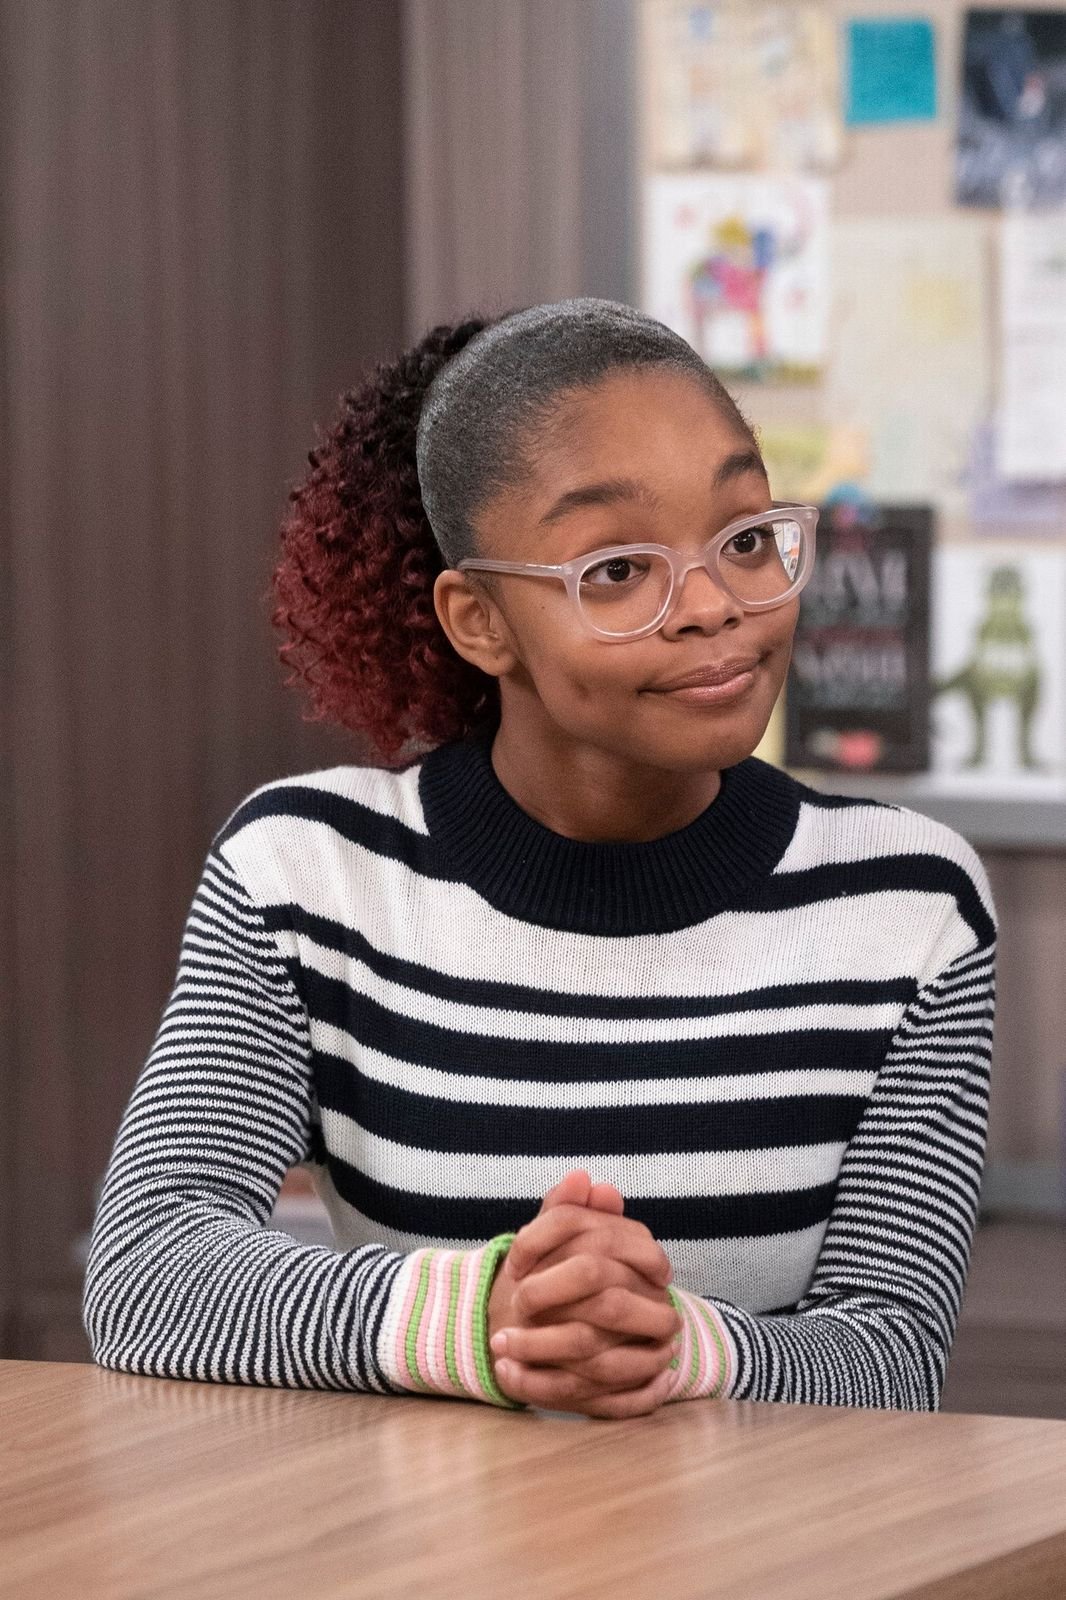 Marsai Martin on the set of "Black-ish's" "Is It Desert or Dessert" episode on March 08, 2019 | Photo: Kelsey McNeal/Getty Images